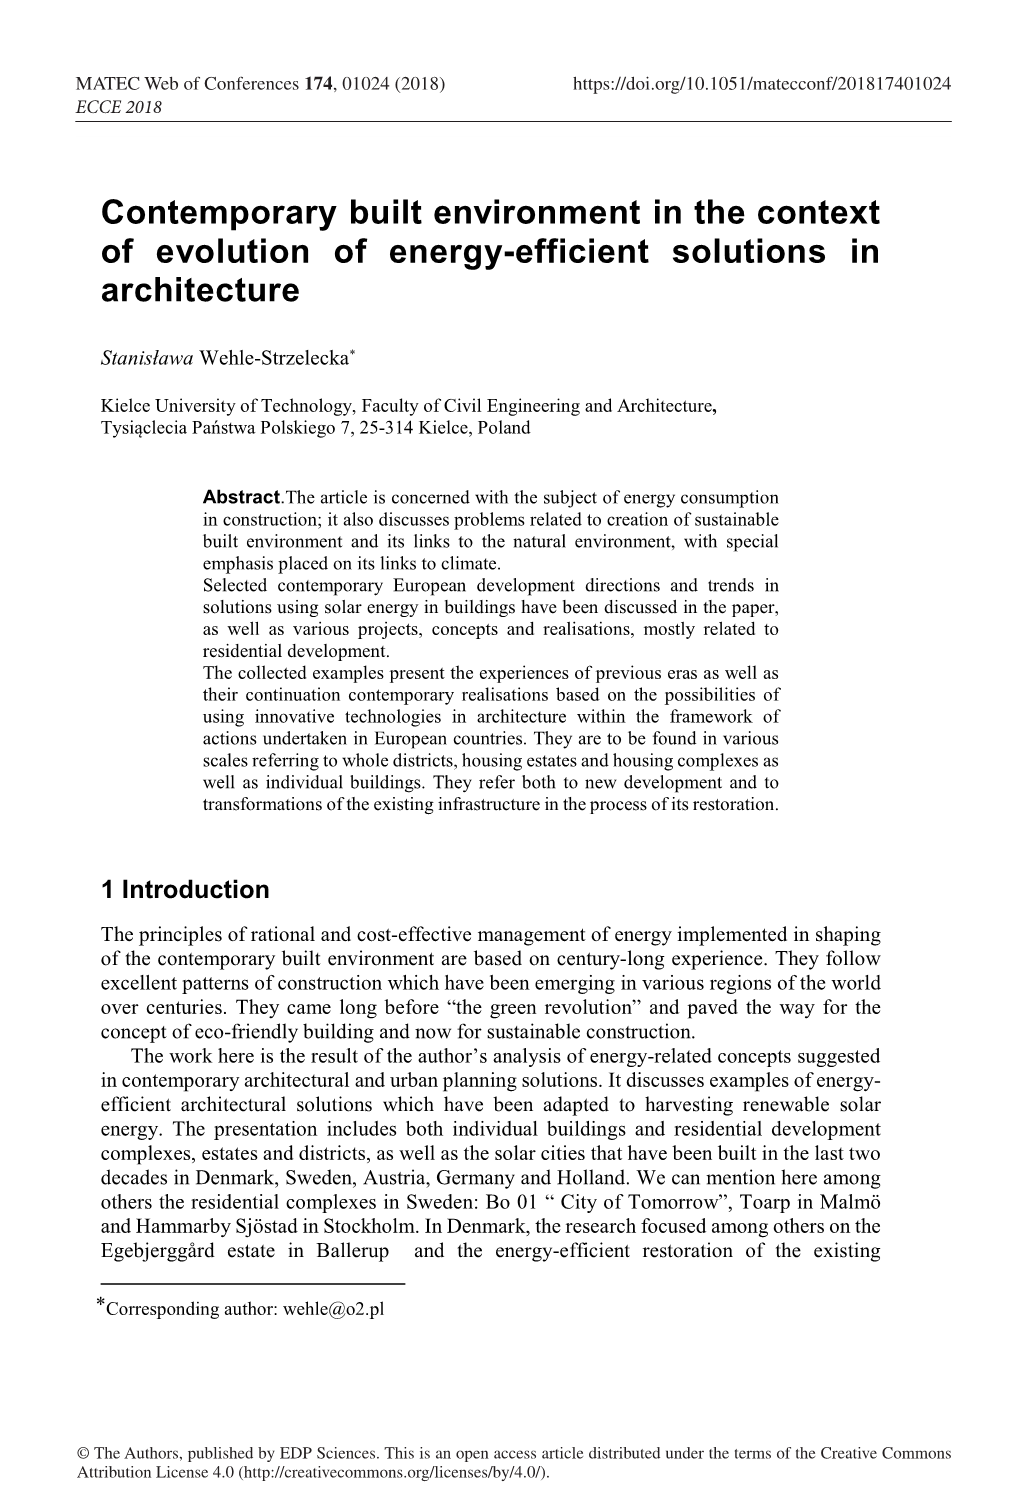 Contemporary Built Environment in the Context of Evolution of Energy-Efficient Solutions in Architecture